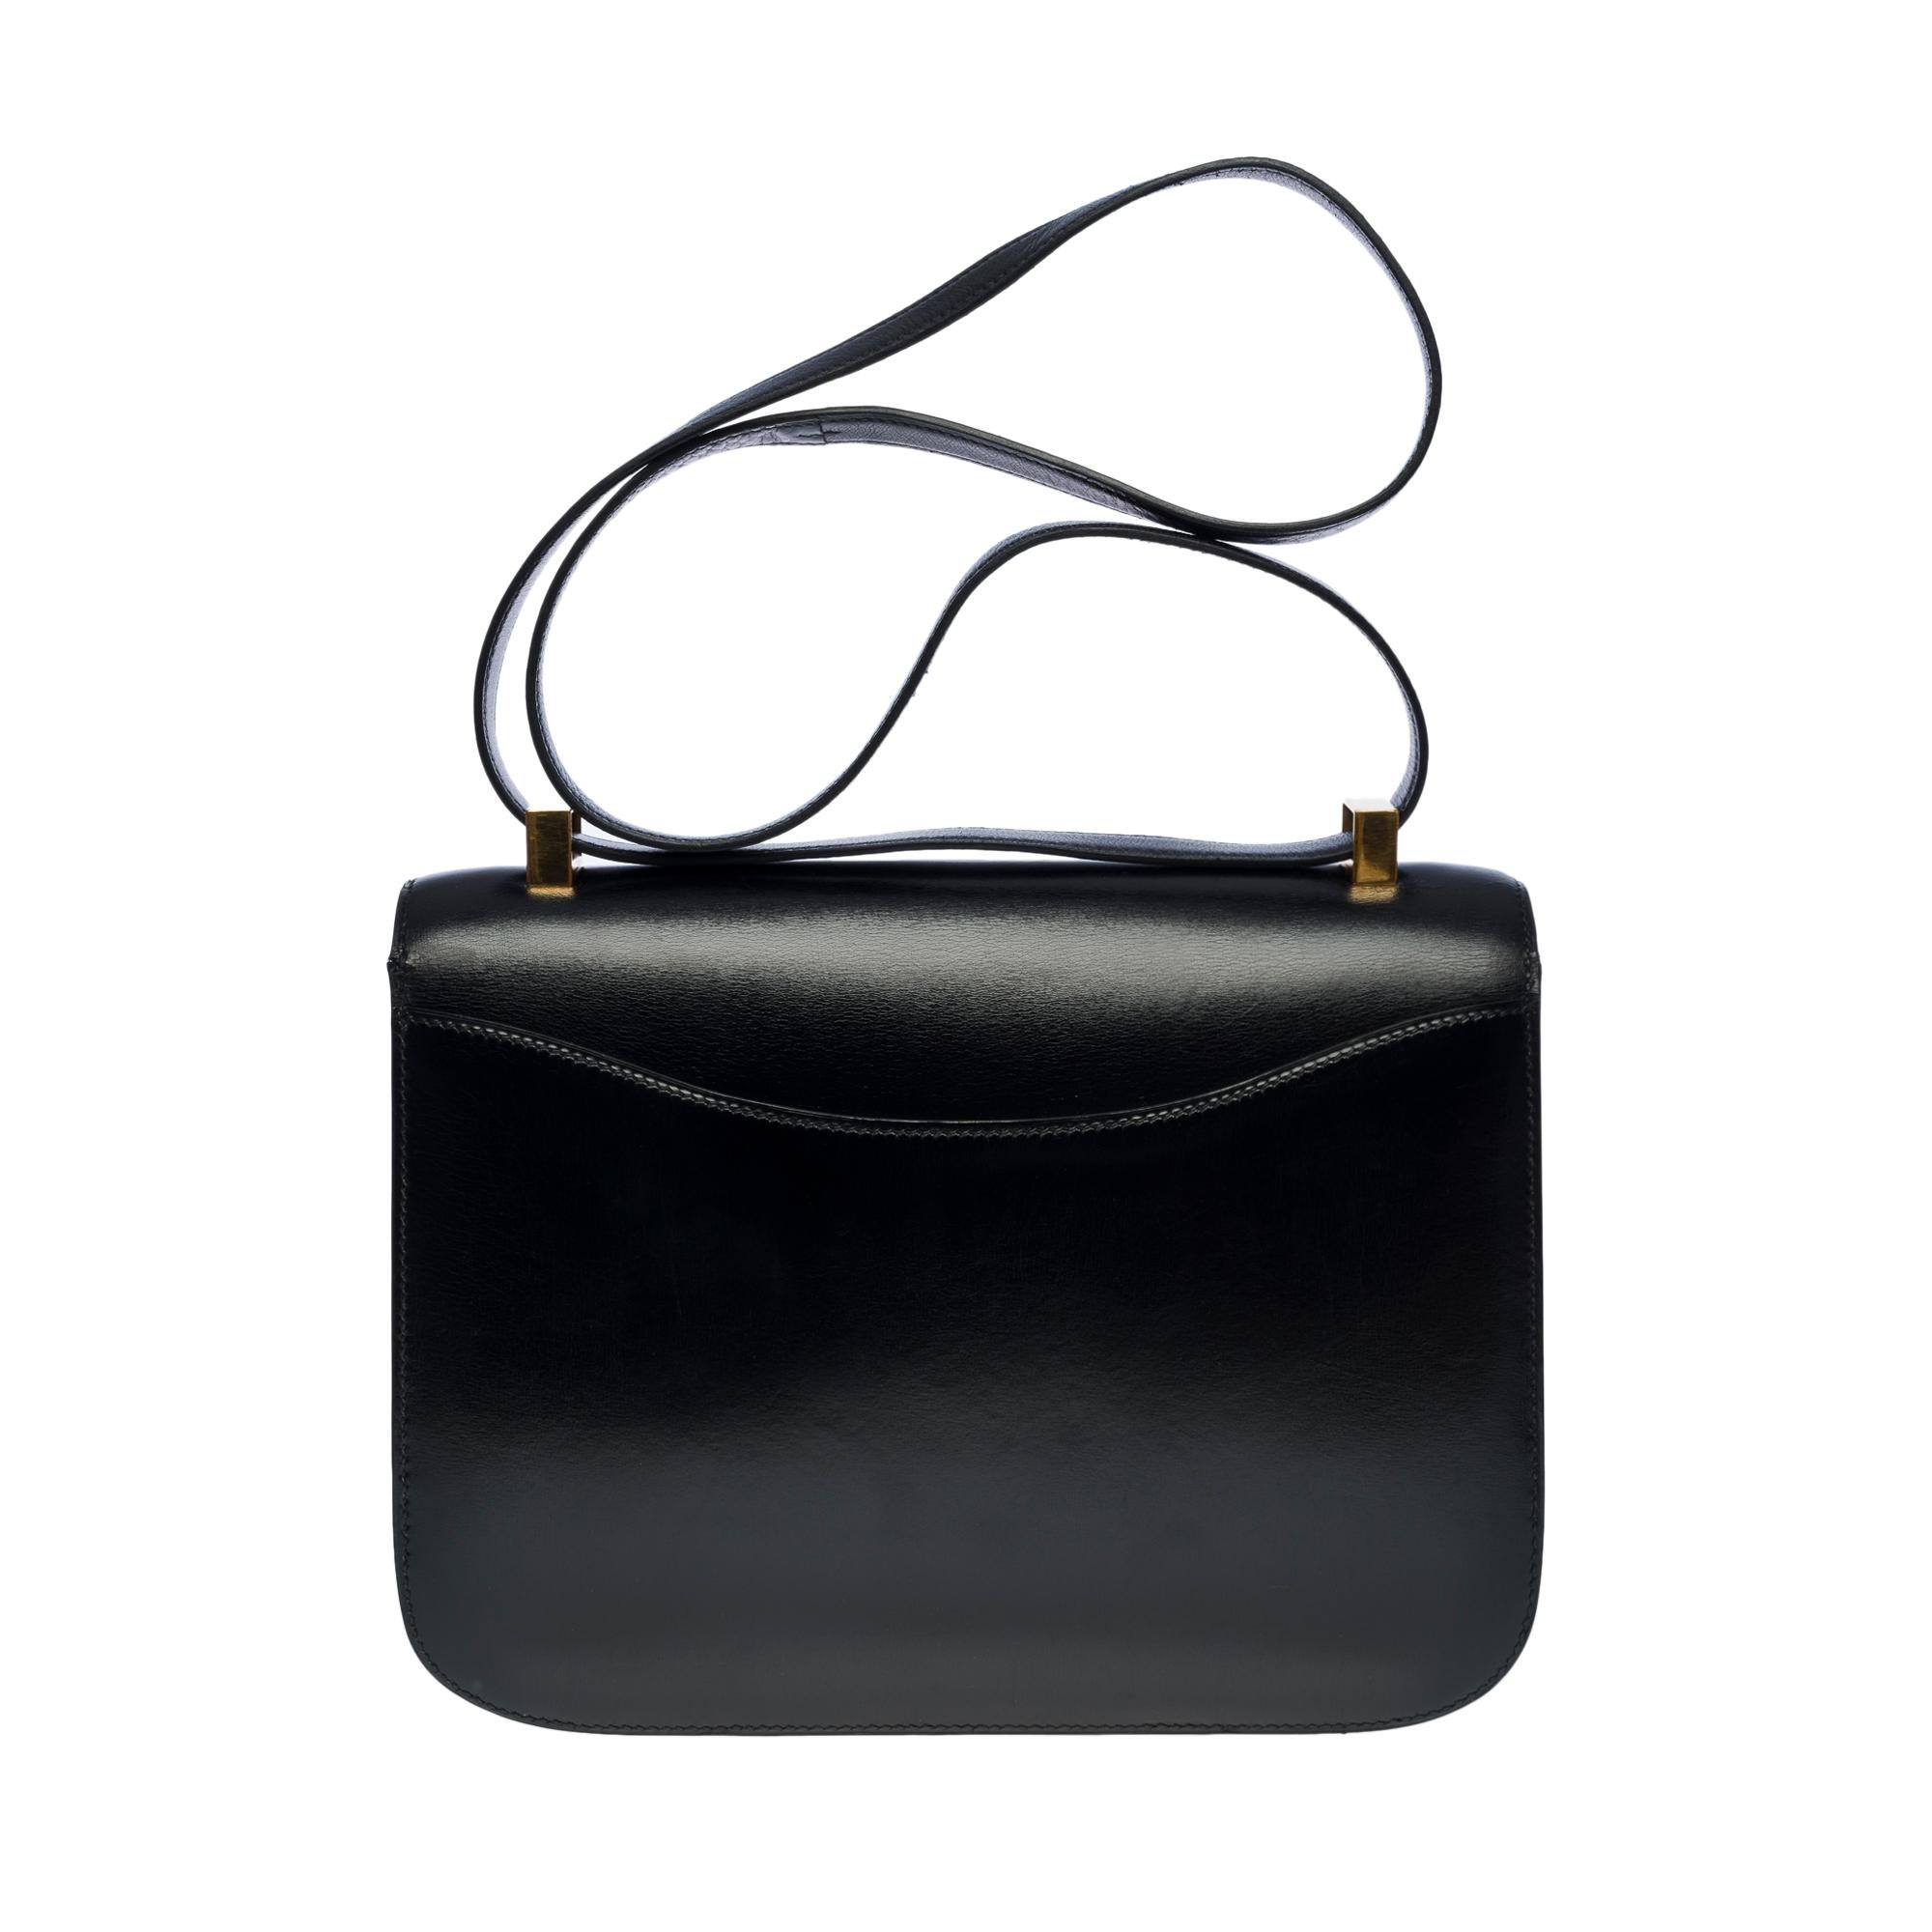 Splendid Hermes Constance handbag 23 cm in black calfskin box leather , gold plated metal hardware, convertible handle in black leather for a hand or shoulder support
Closure marked H on flap
A patch pocket on the back of the bag
Black leather